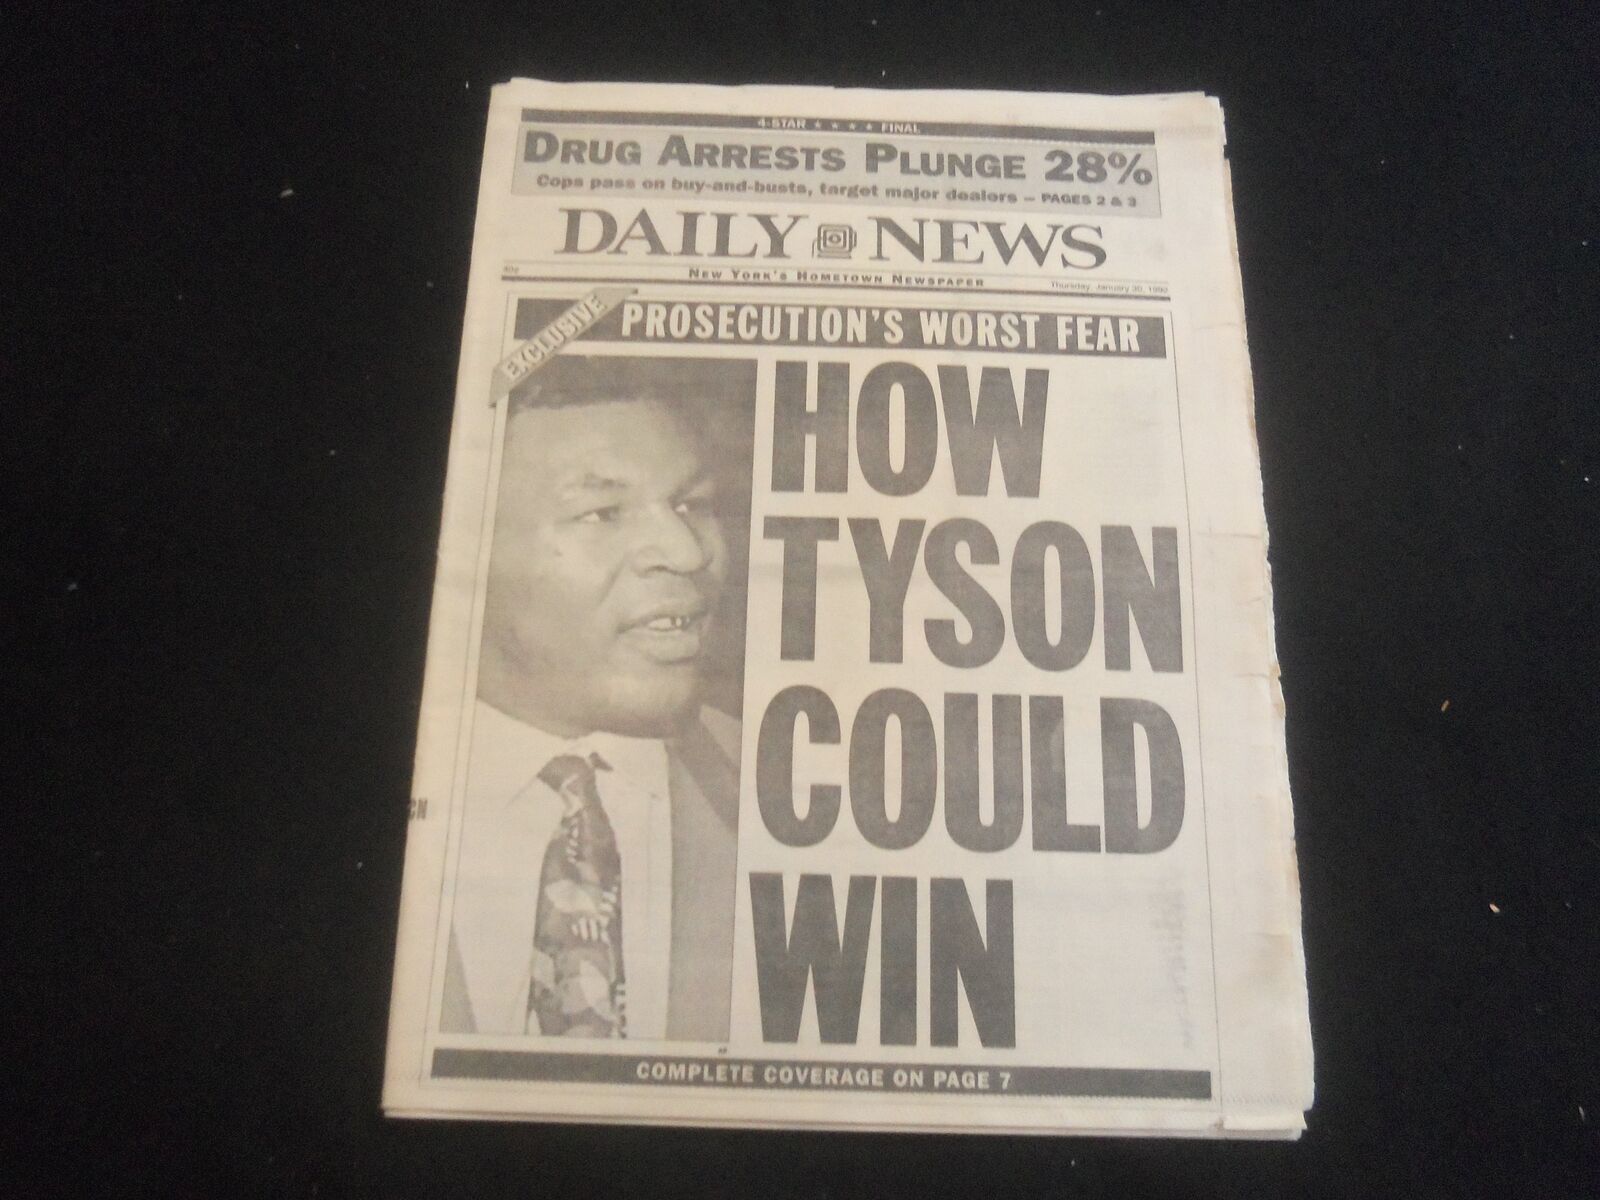 1992 JAN 30 NEW YORK DAILY NEWS NEWSPAPER - HOW MIKE TYSON COULD WIN - NP 5885